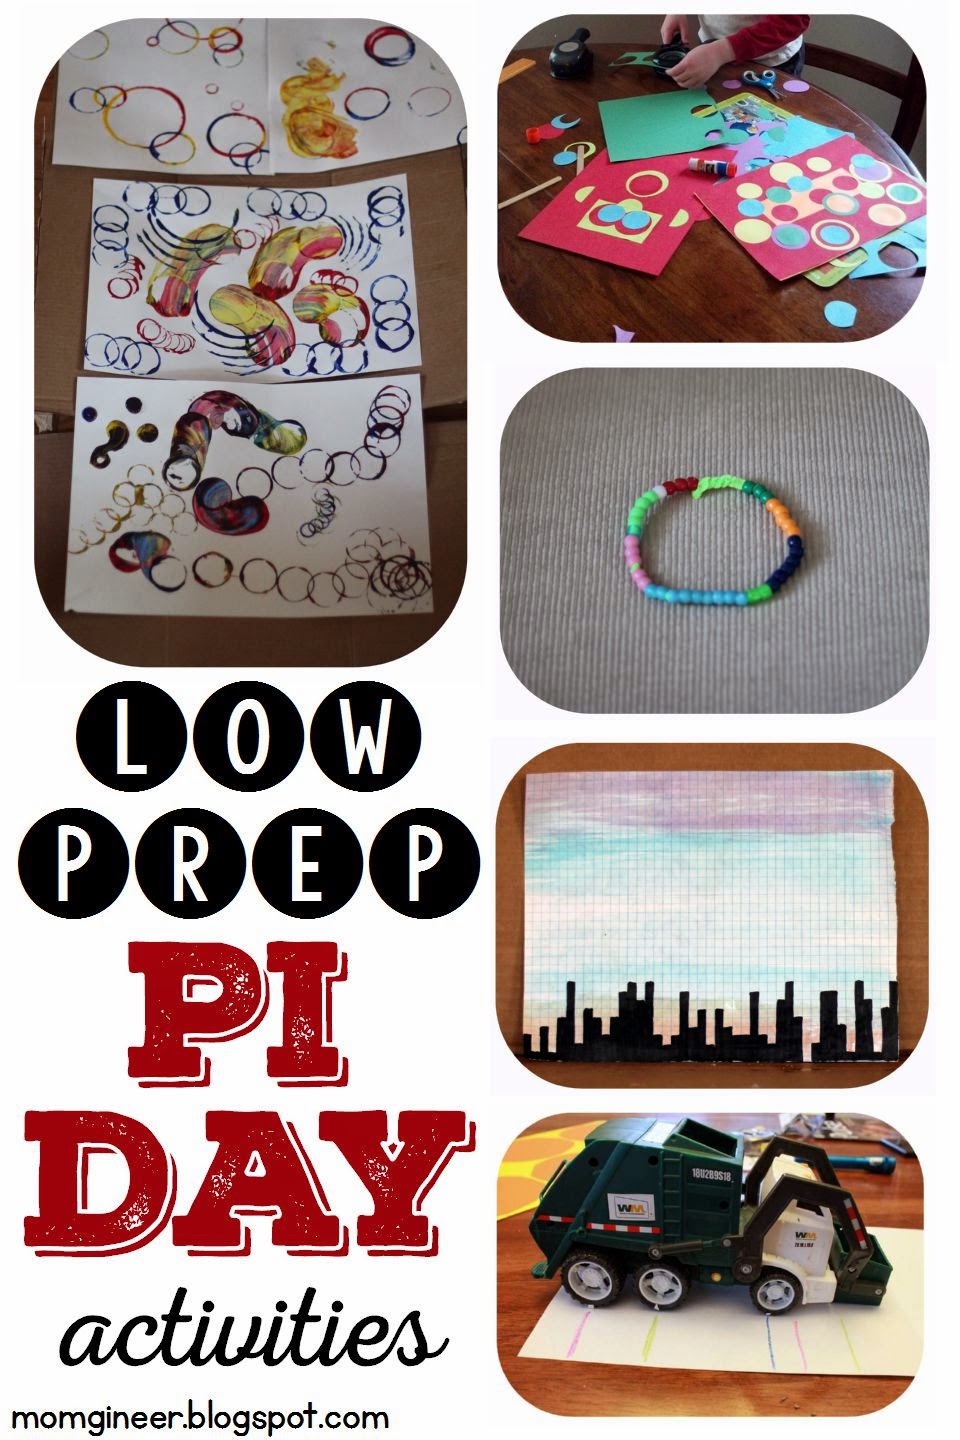 Pi Day is on its way! Pi Day Activities! momgineer